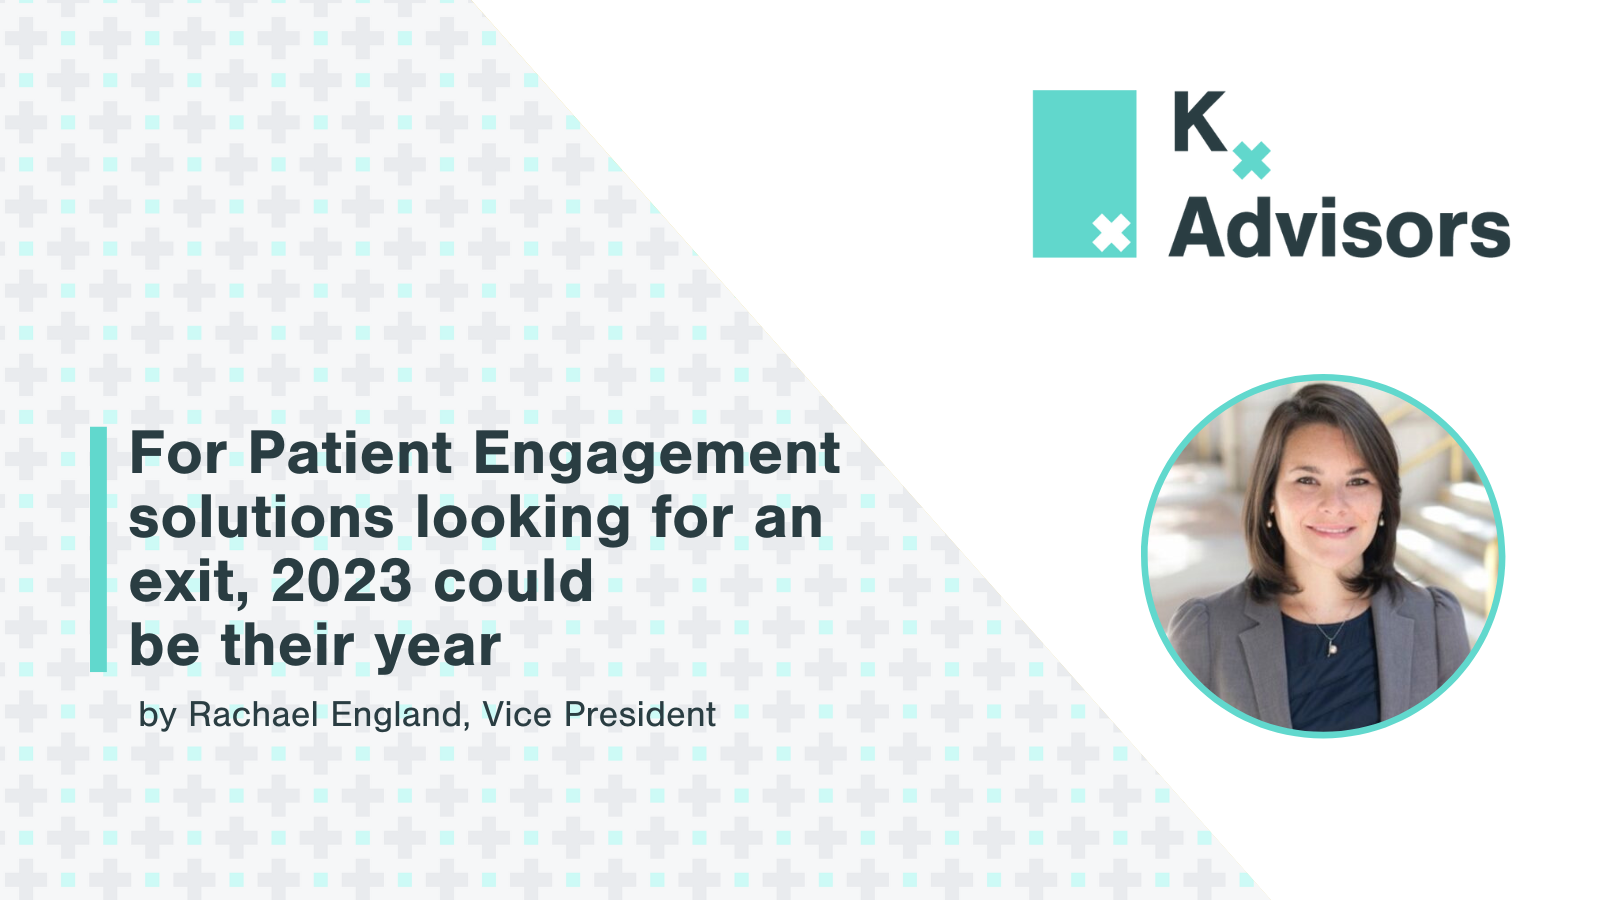 For Patient Engagement solutions looking for an exit, 2023 could be their year